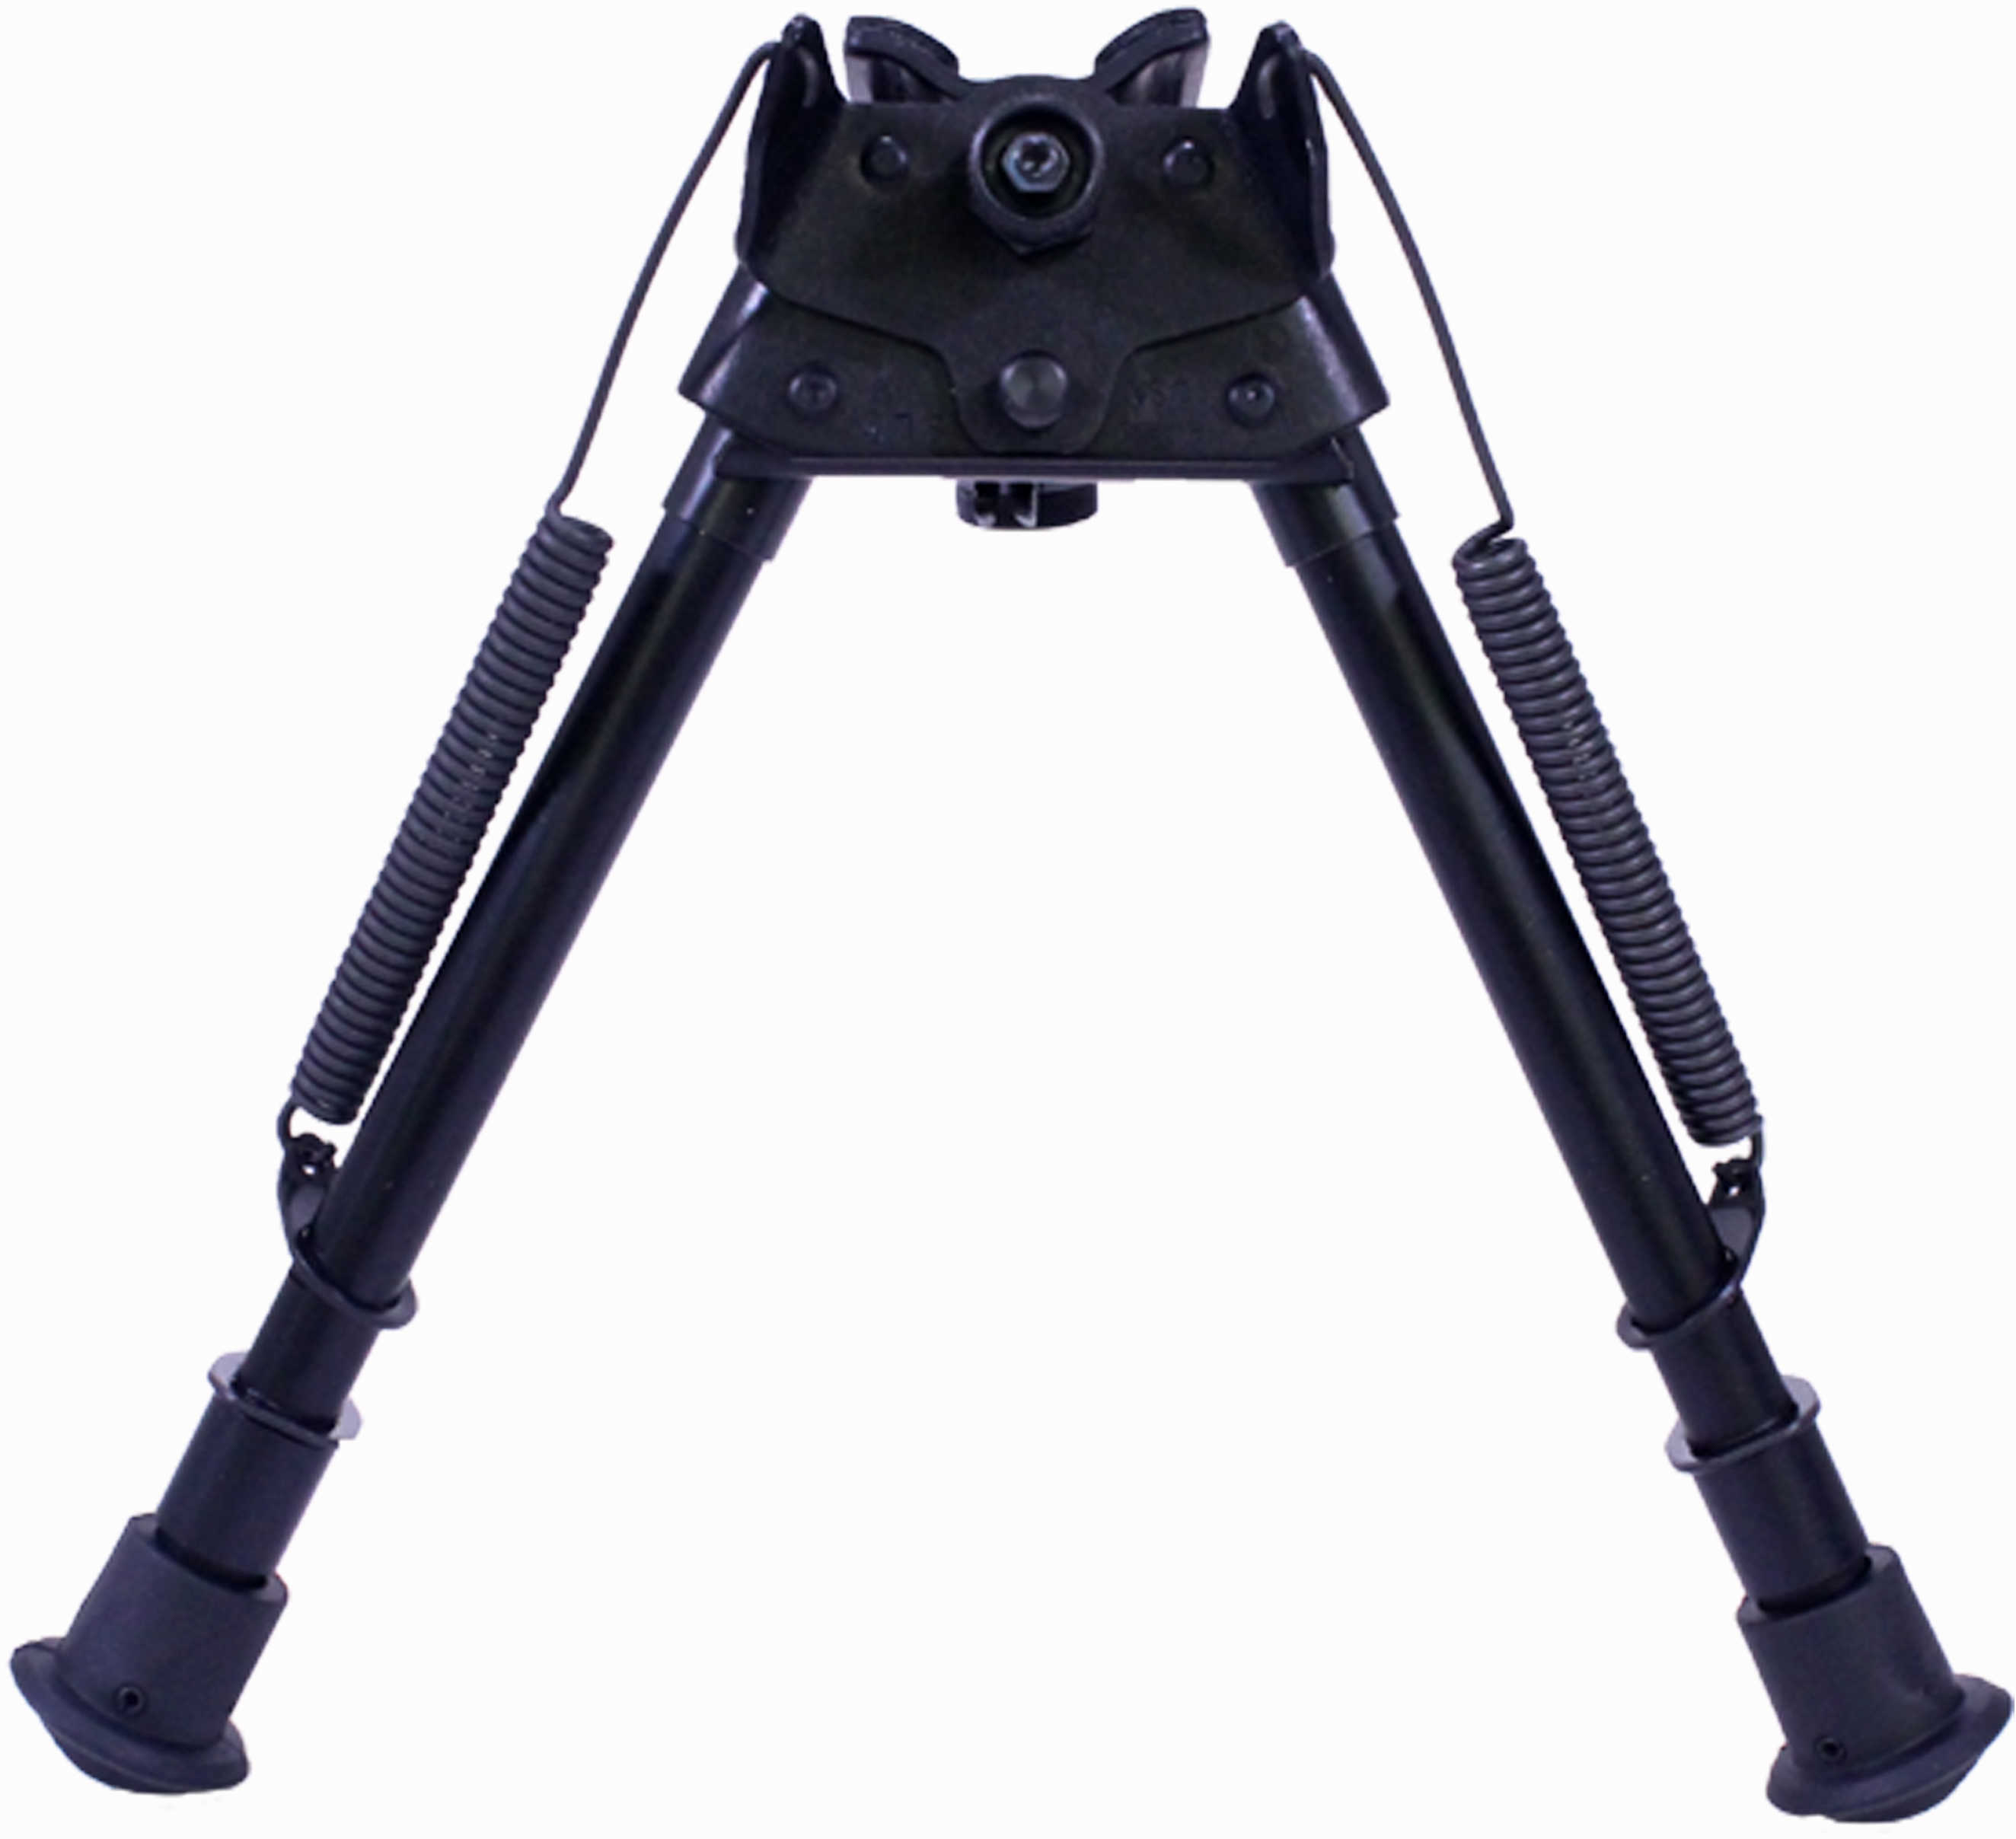 Harris Engineering Ultralight Bipod - Rotating Swivel With Leg Notch The Legs Eject By Spring Action - Seven Height Sett